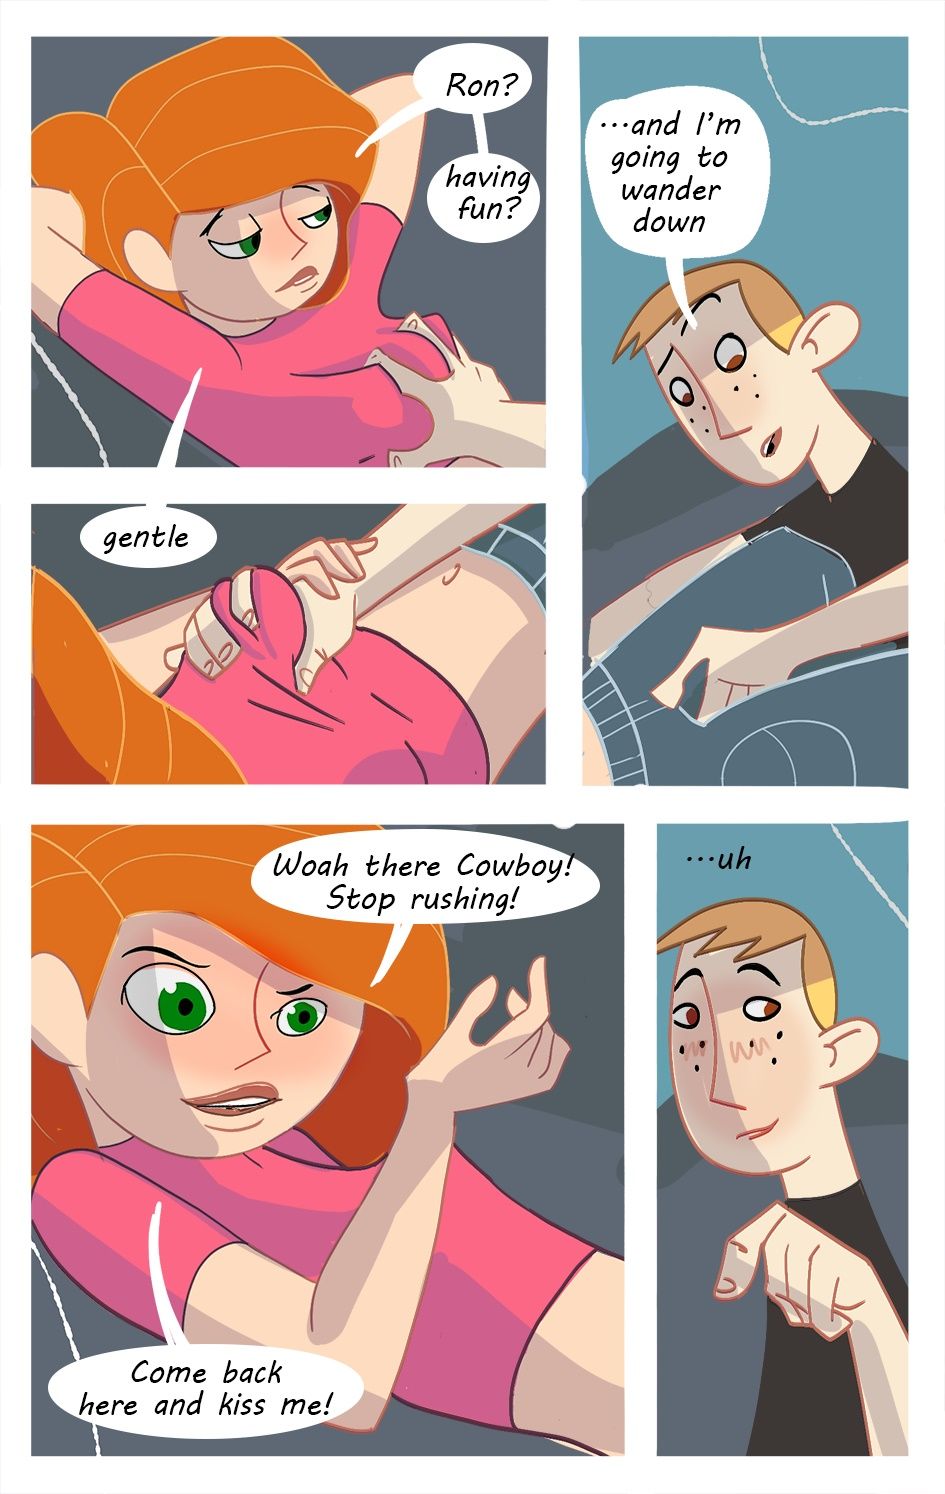 [Uanonkp] The Couch (Kim Possible) 7